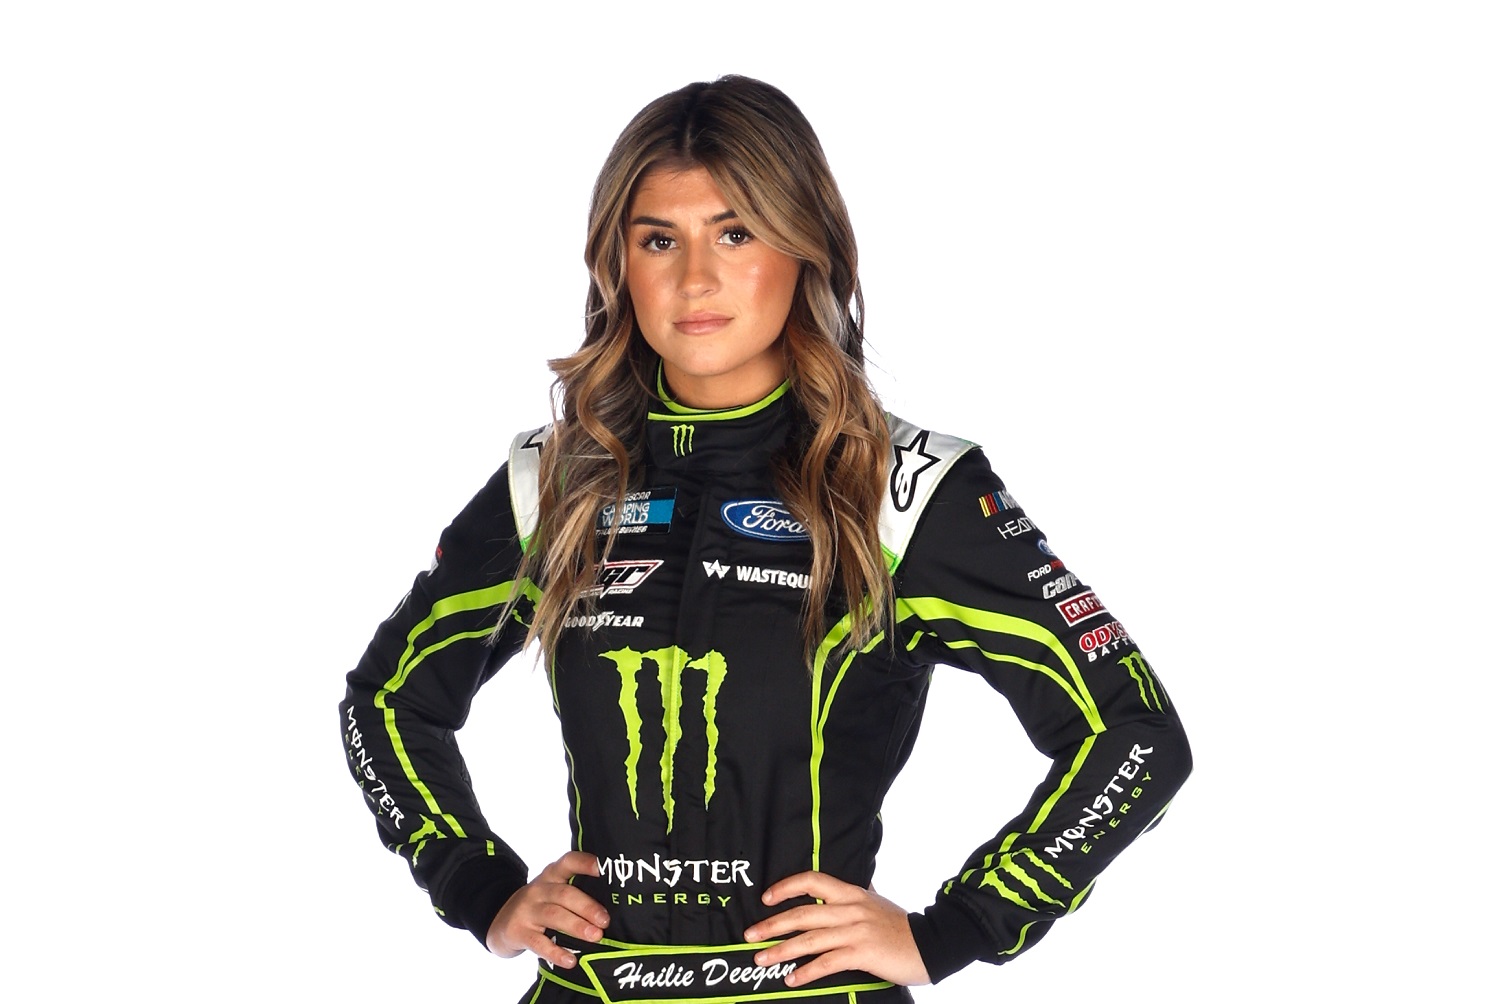 NASCAR driver Hailie Deegan poses for a photo during NASCAR Production Days at Clutch Studios on Jan. 18, 2022, in Concord, North Carolina.